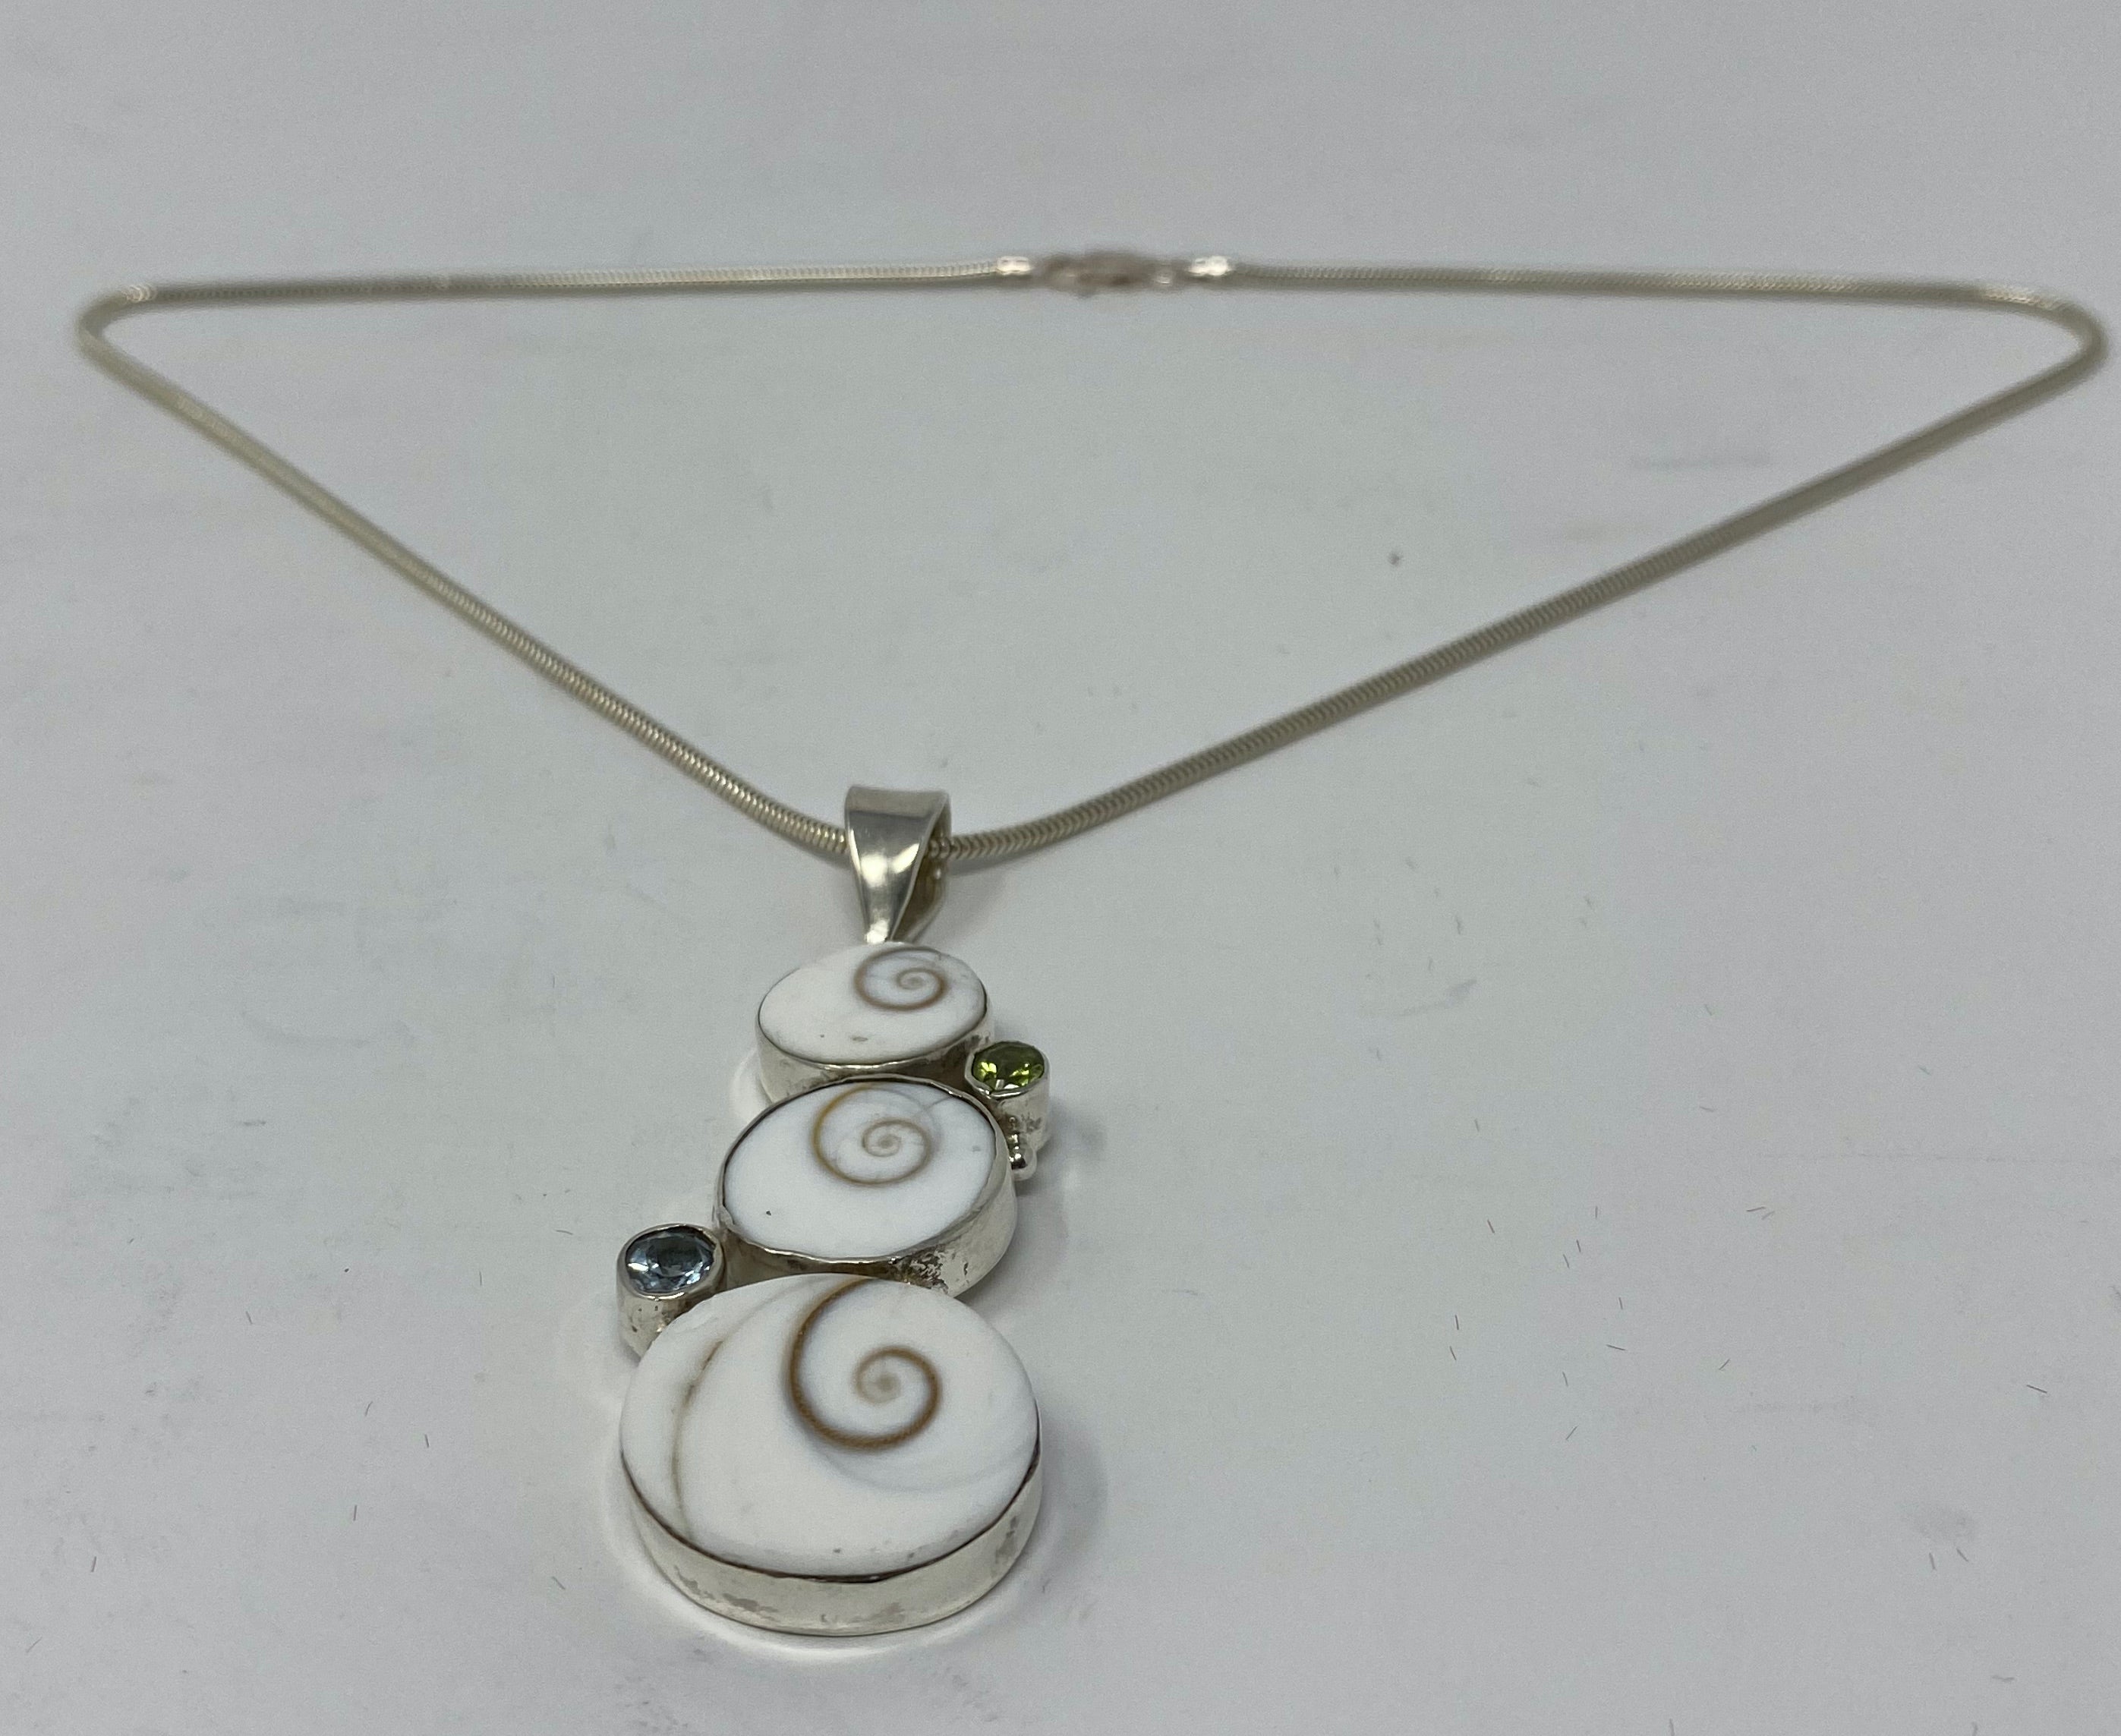 Silver and Sea Shell with Blue Topaz and Peridot Stone Pendant on Snake Chain